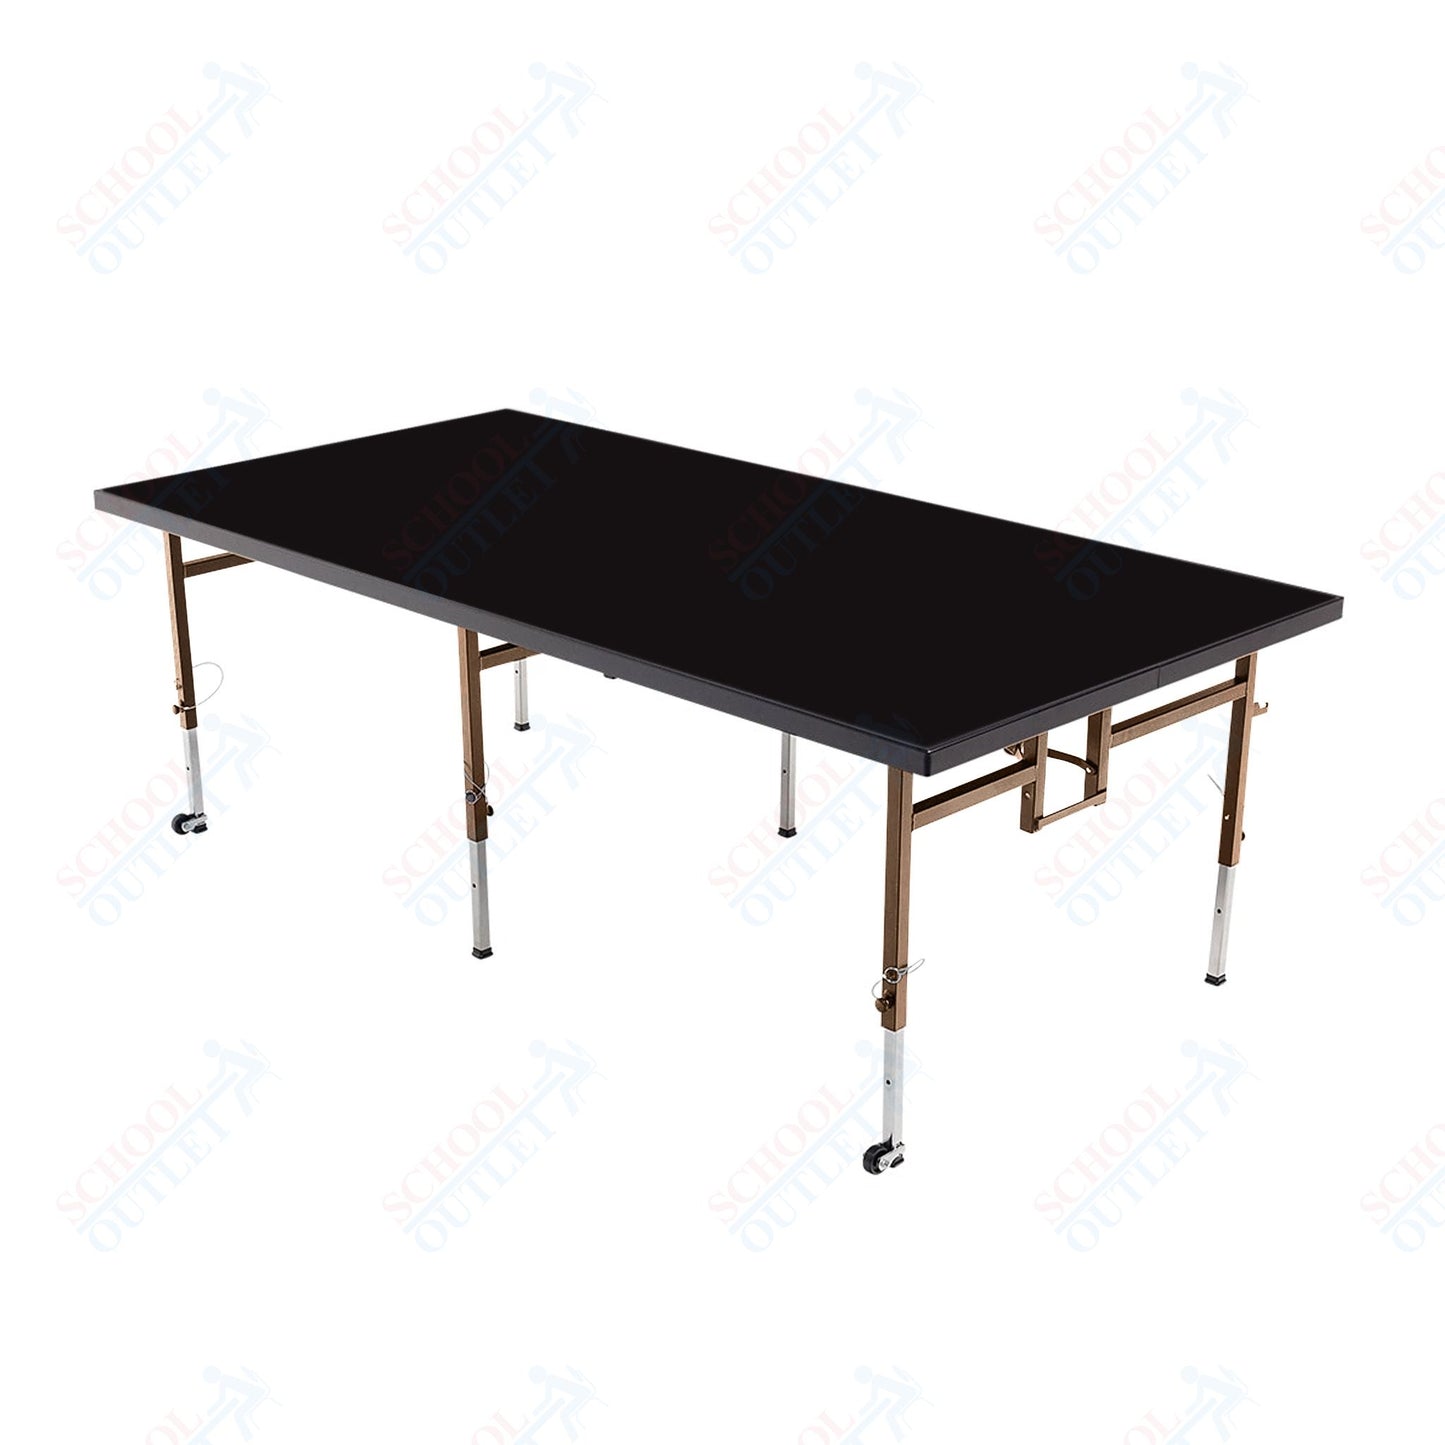 AmTab Adjustable Height Stage - Polypropylene Top - 36"W x 96"L x Adjustable 32" to 40"H  (AmTab AMT-STA3832P)